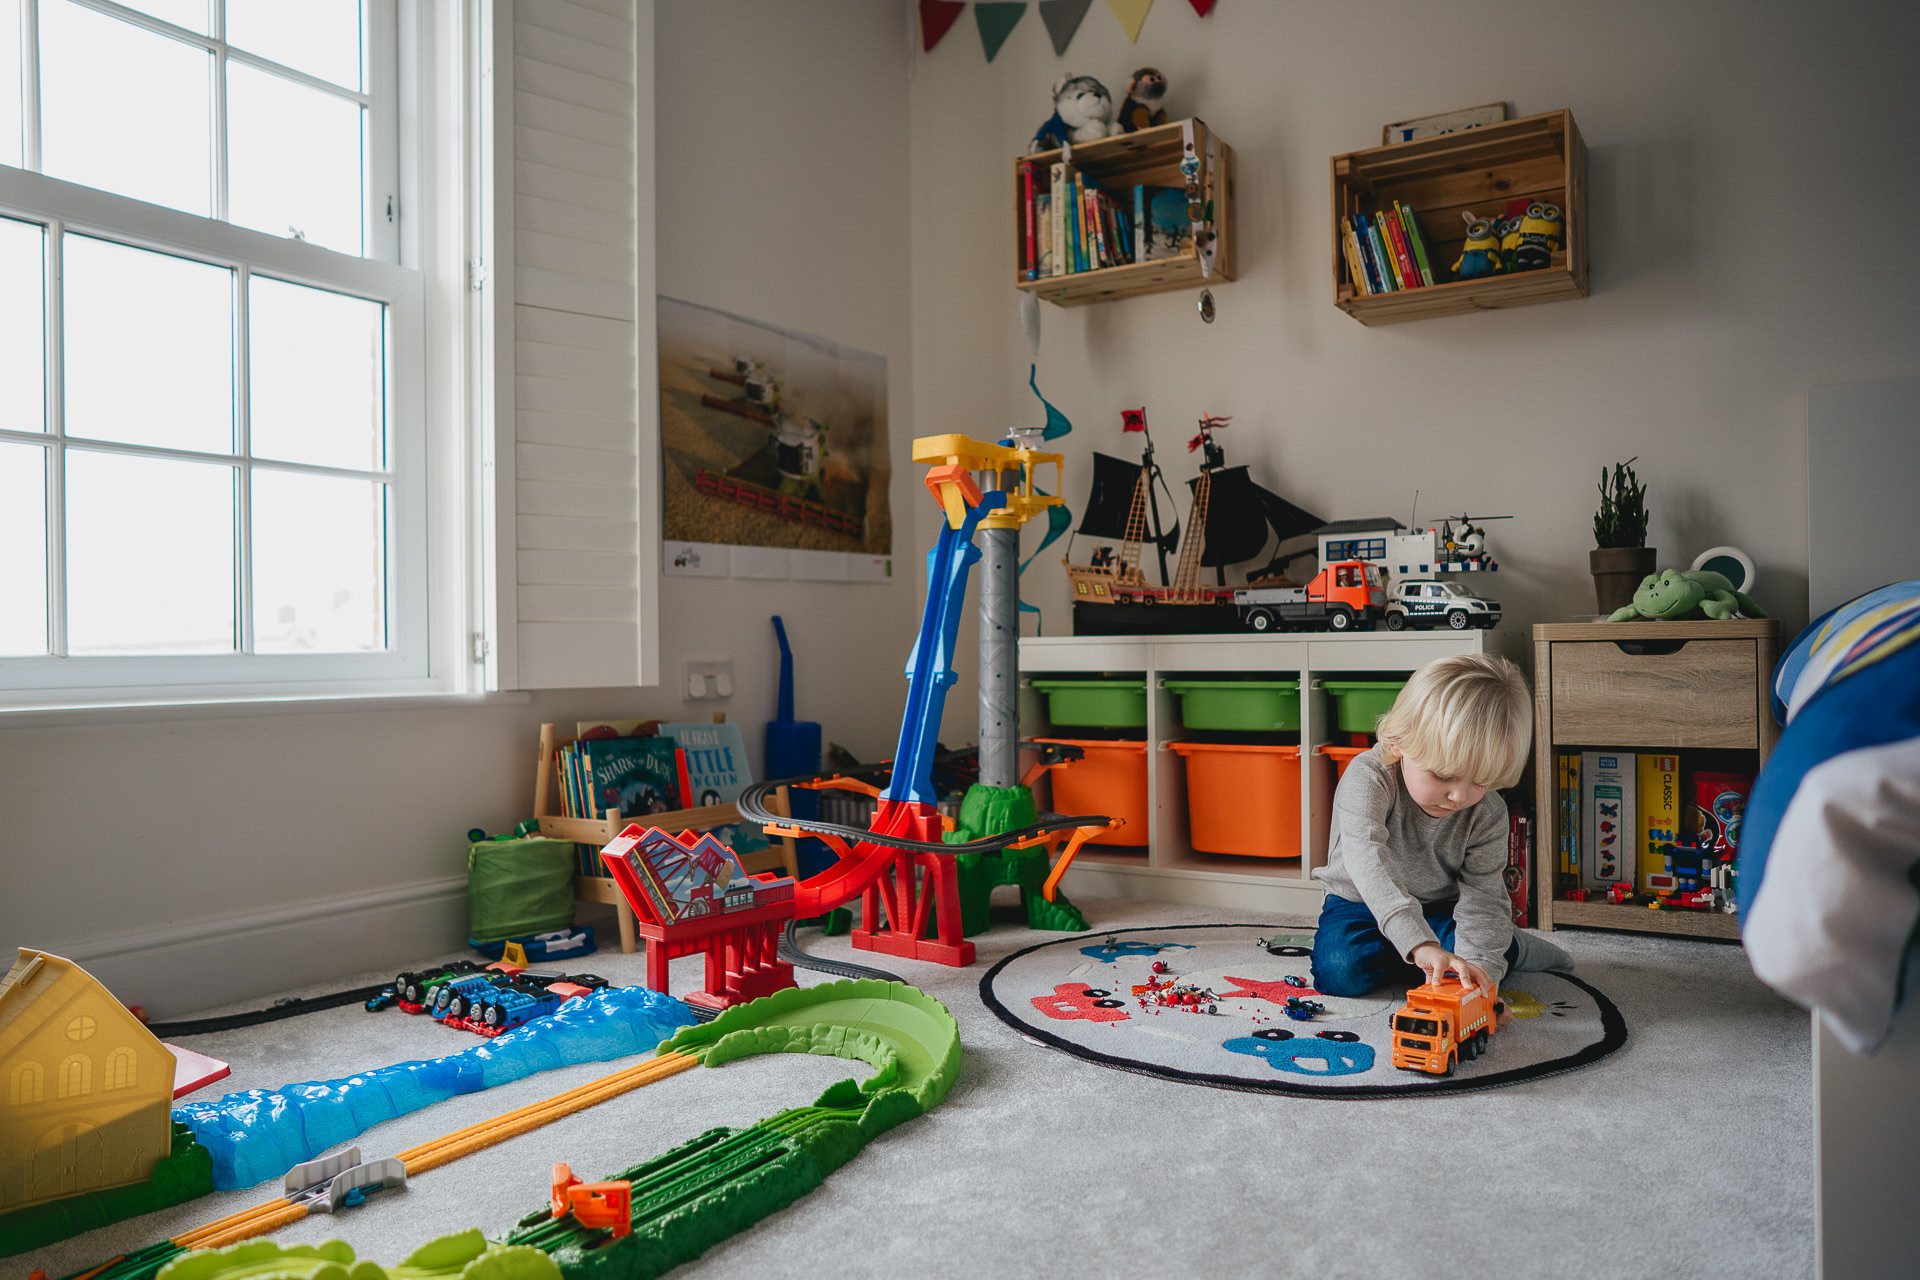 A small boy playing in his bedroom